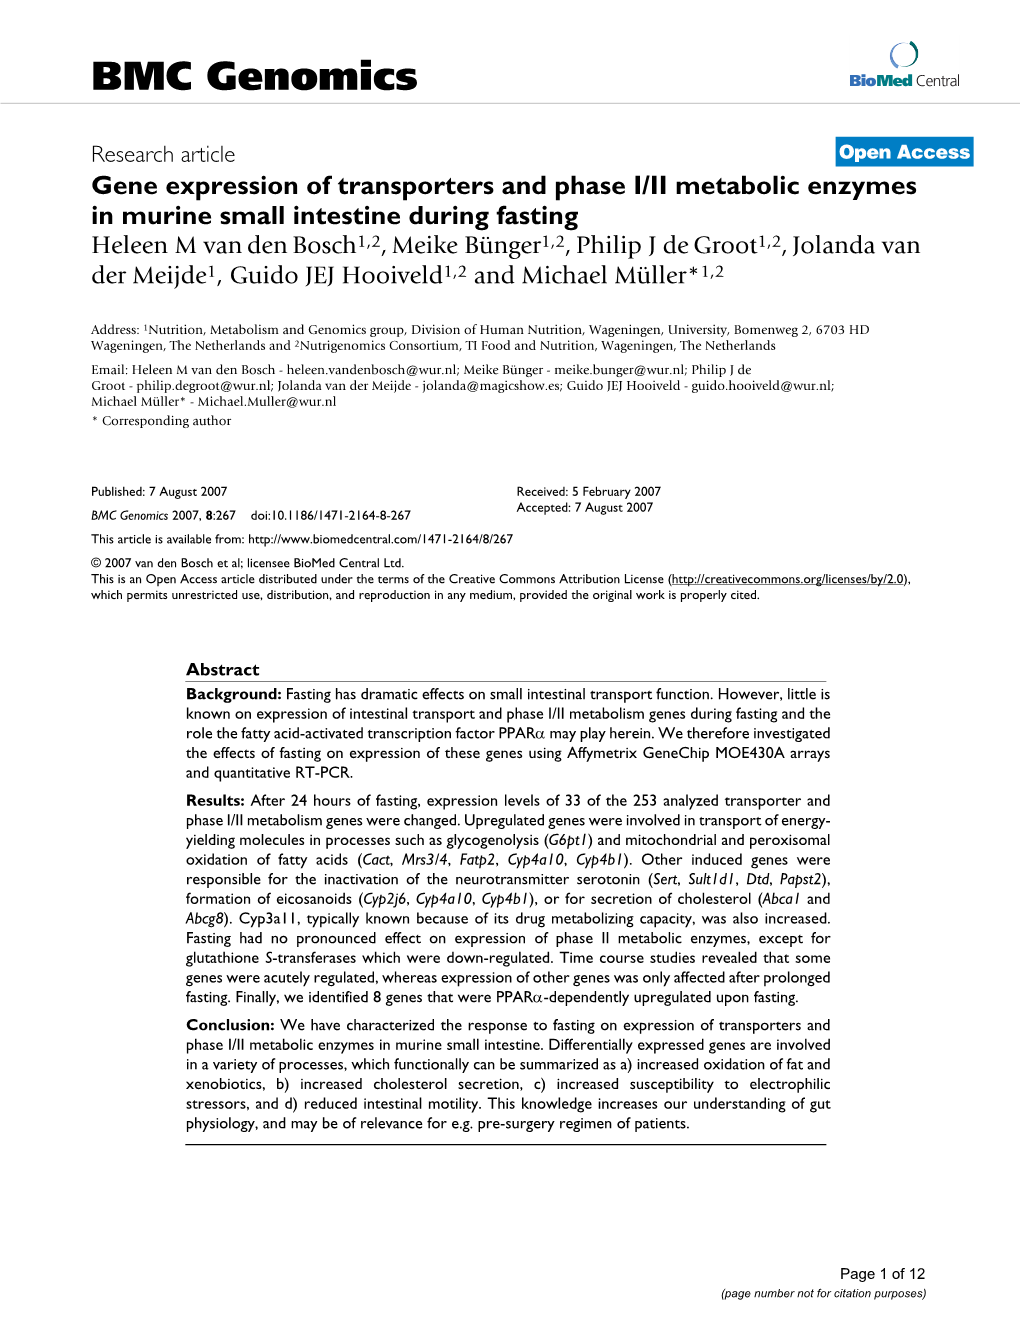 Gene Expression of Transporters and Phase I/II Metabolic Enzymes In